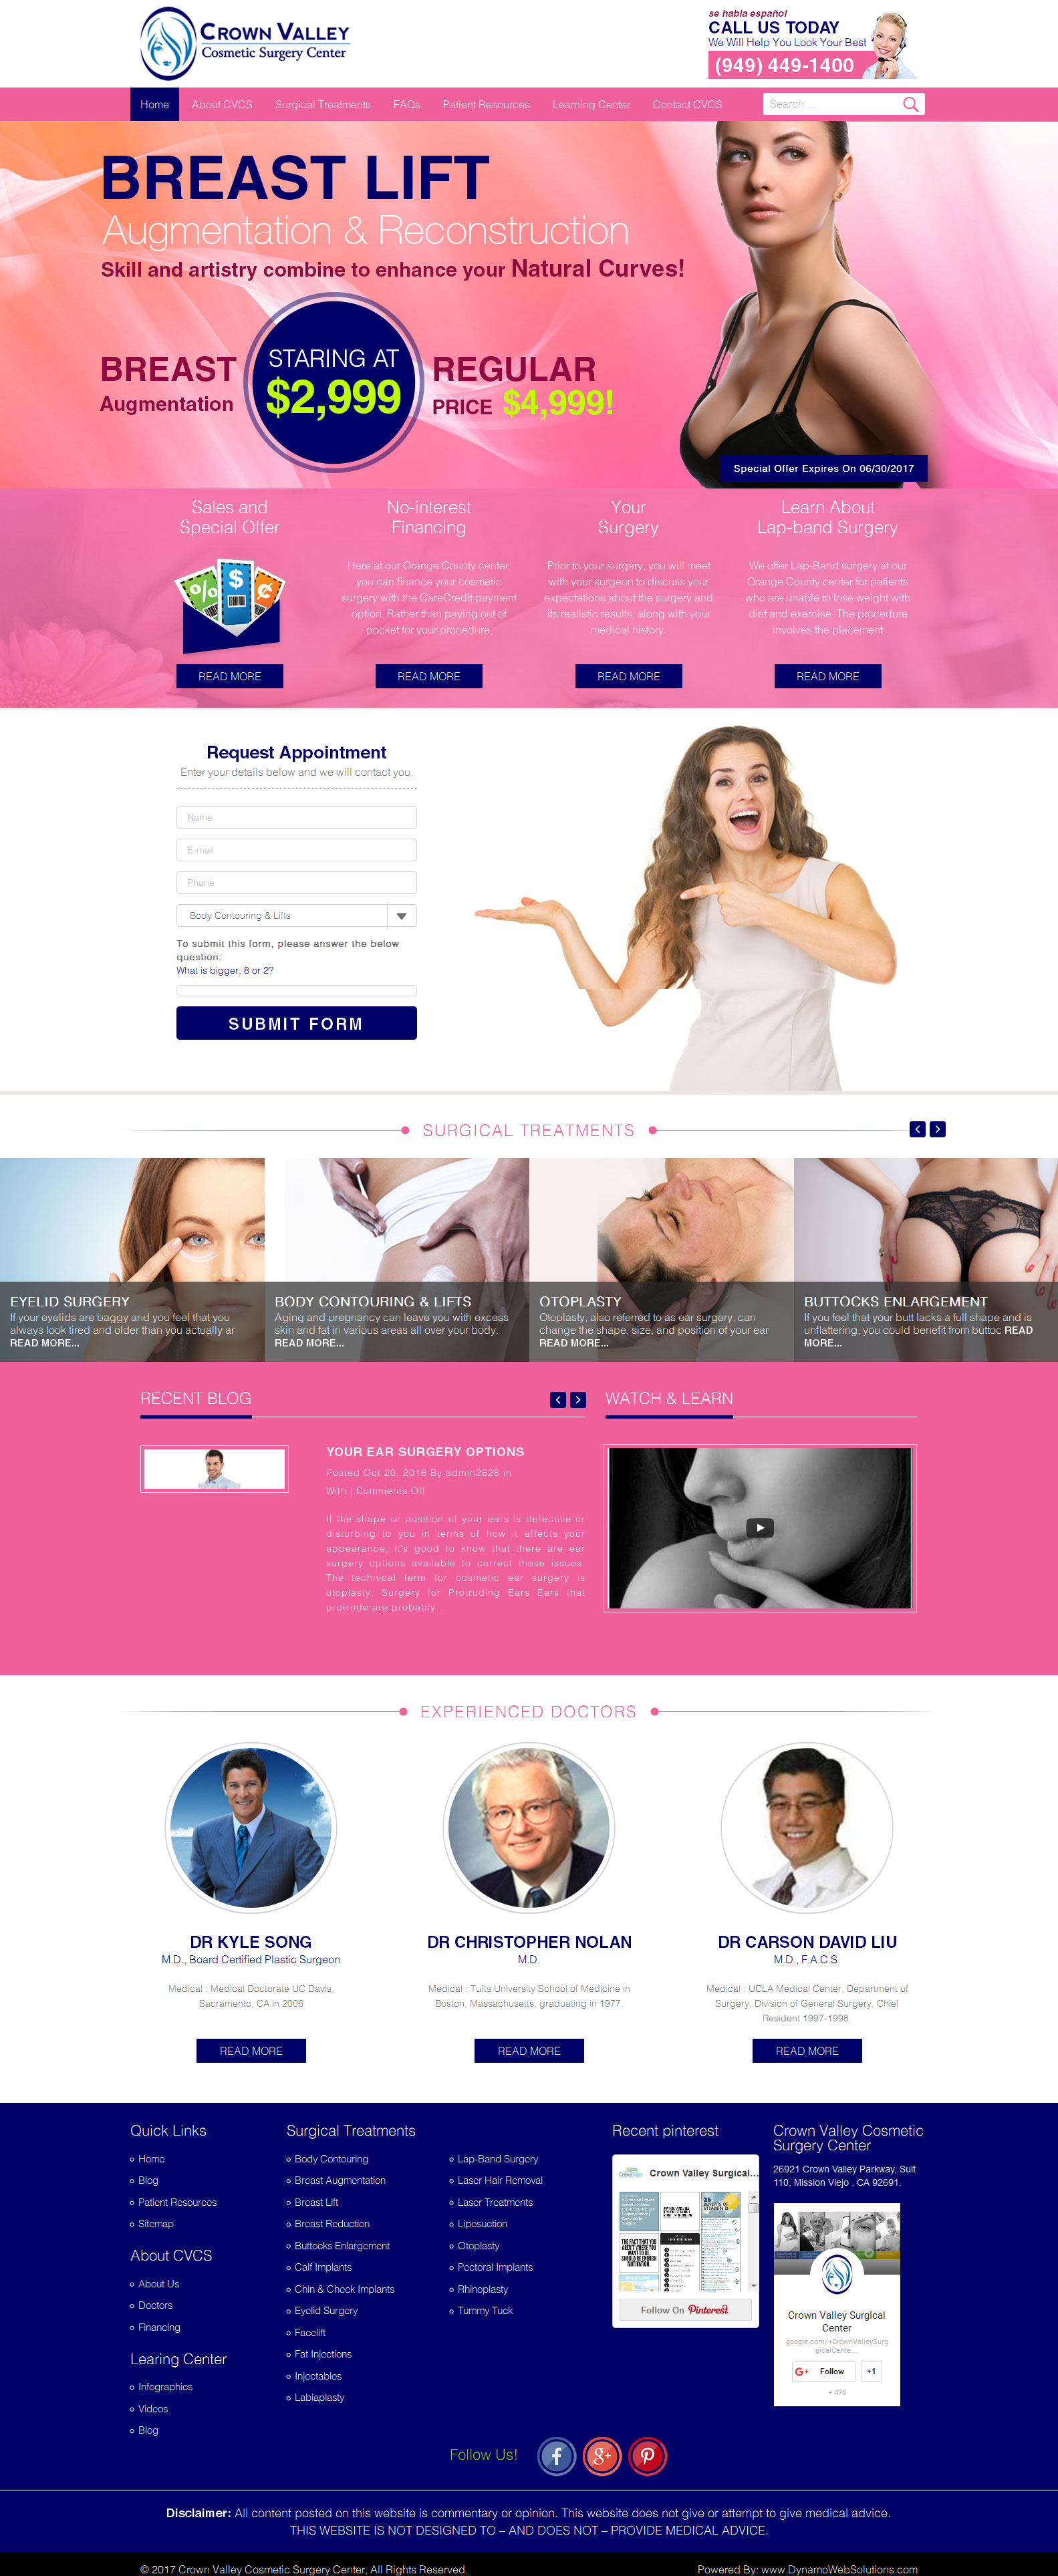 Crown Valley Cosmetic Surgery - Crown Valley Cosmetic Care